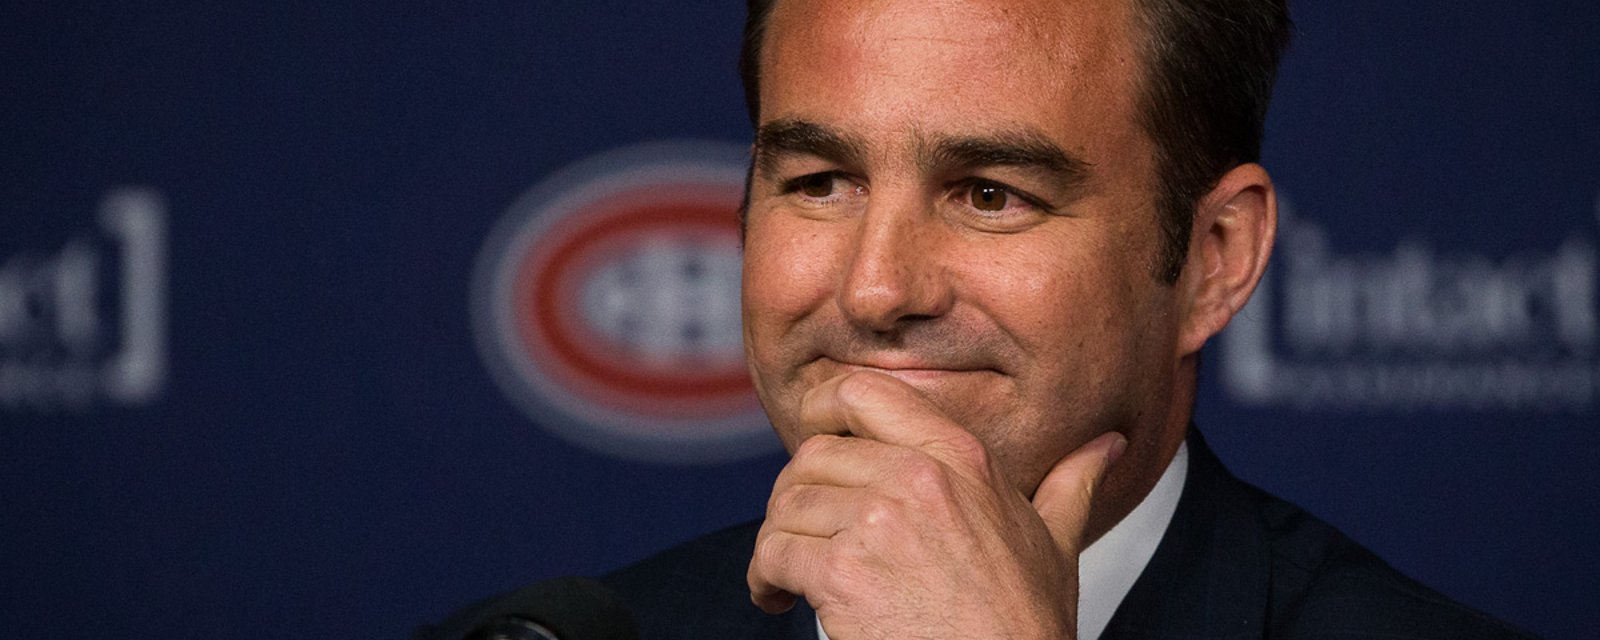 NHL owner publicly addresses falling out between player and team